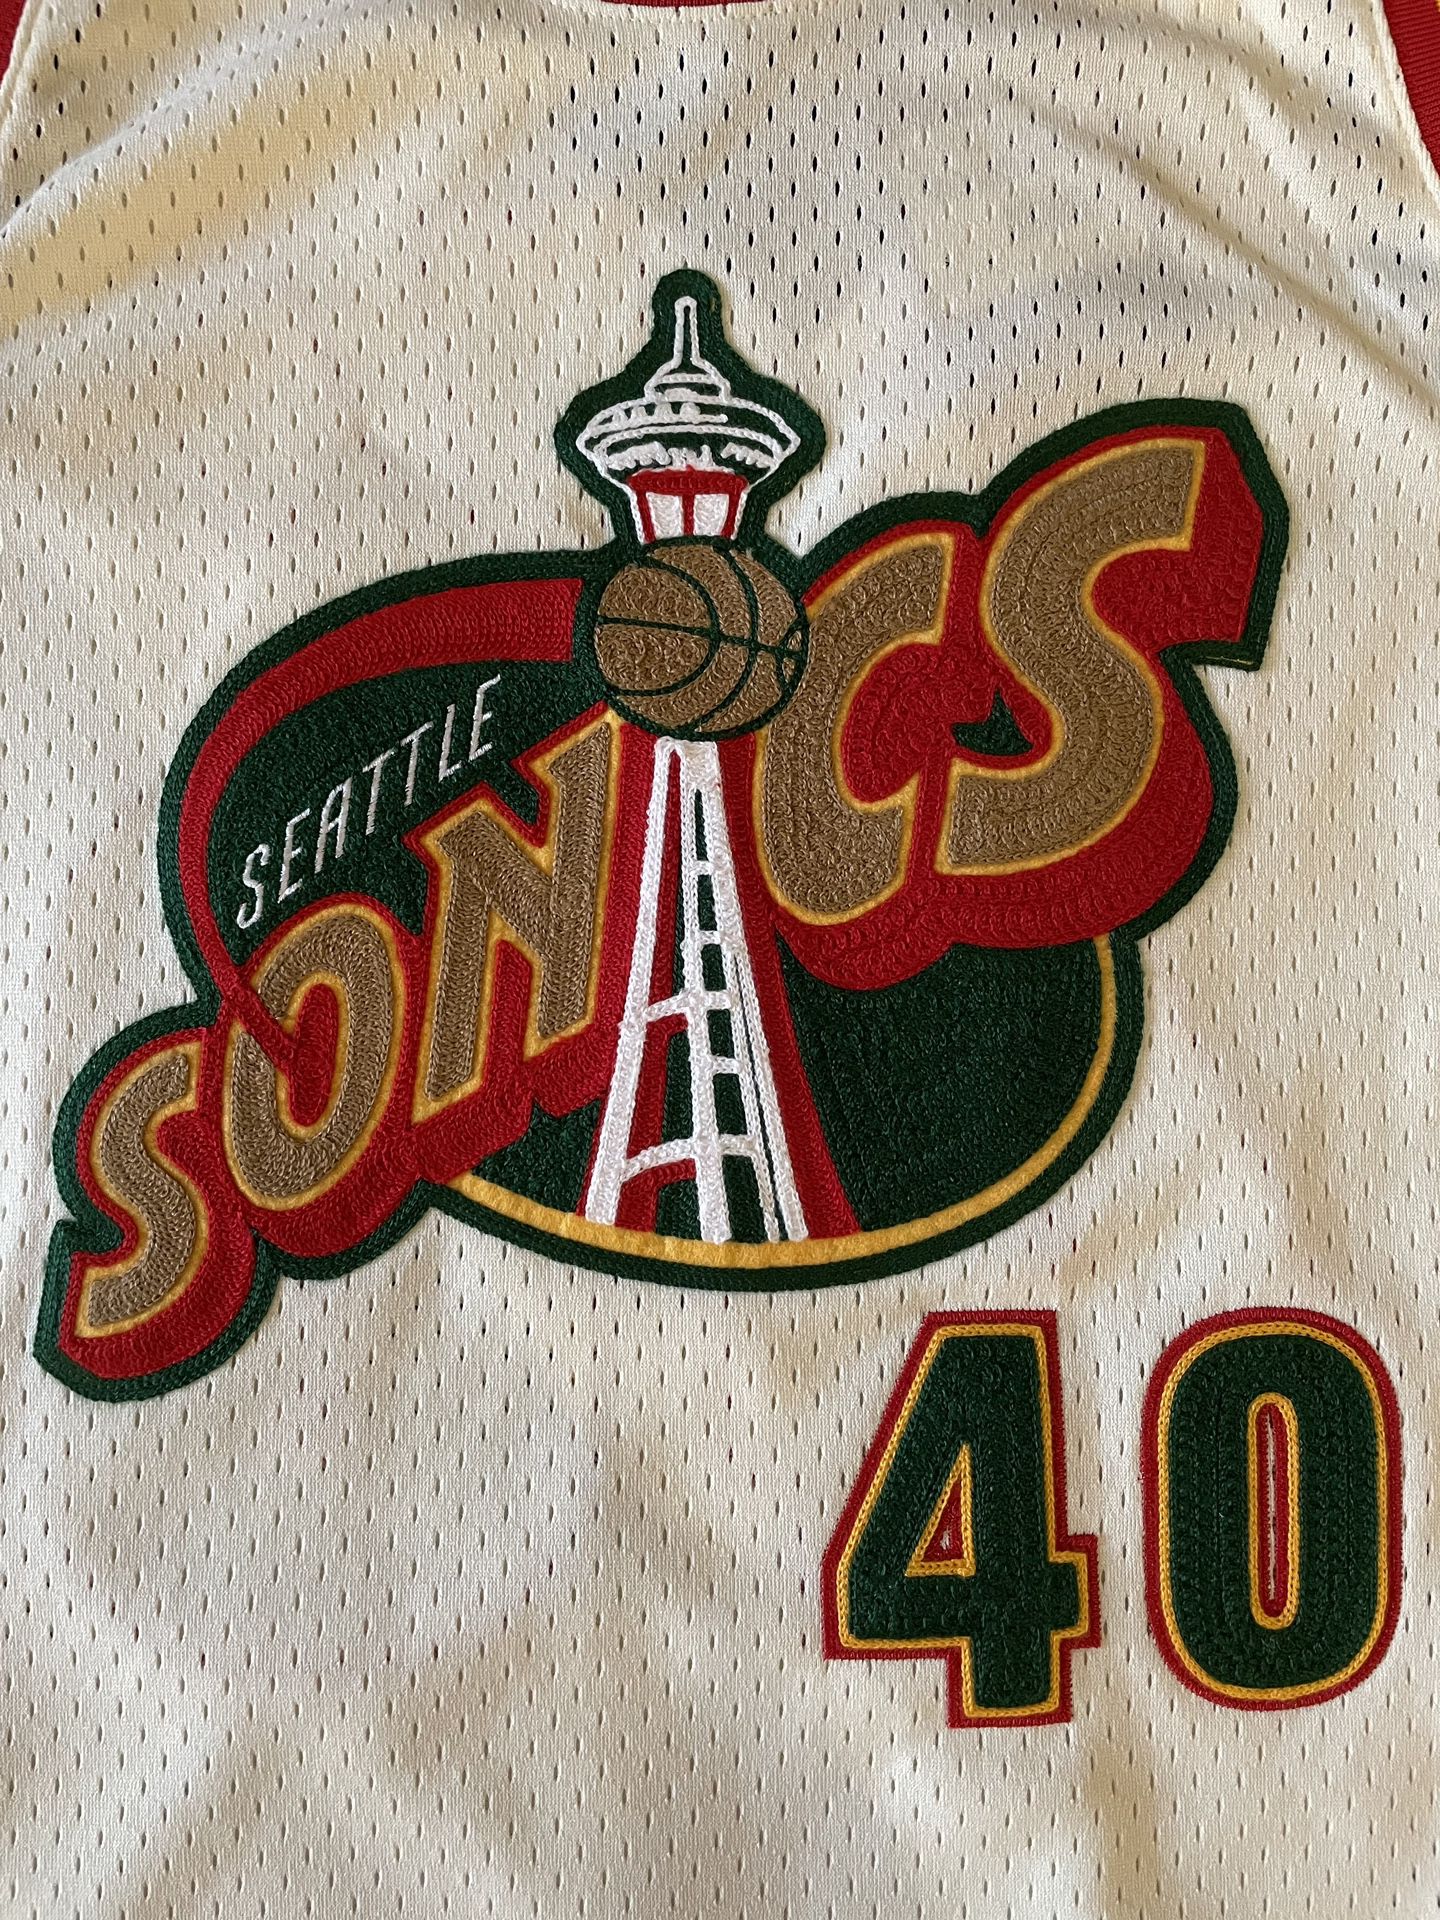 Shawn Kemp Sonics Jersey L for Sale in Bend, OR - OfferUp